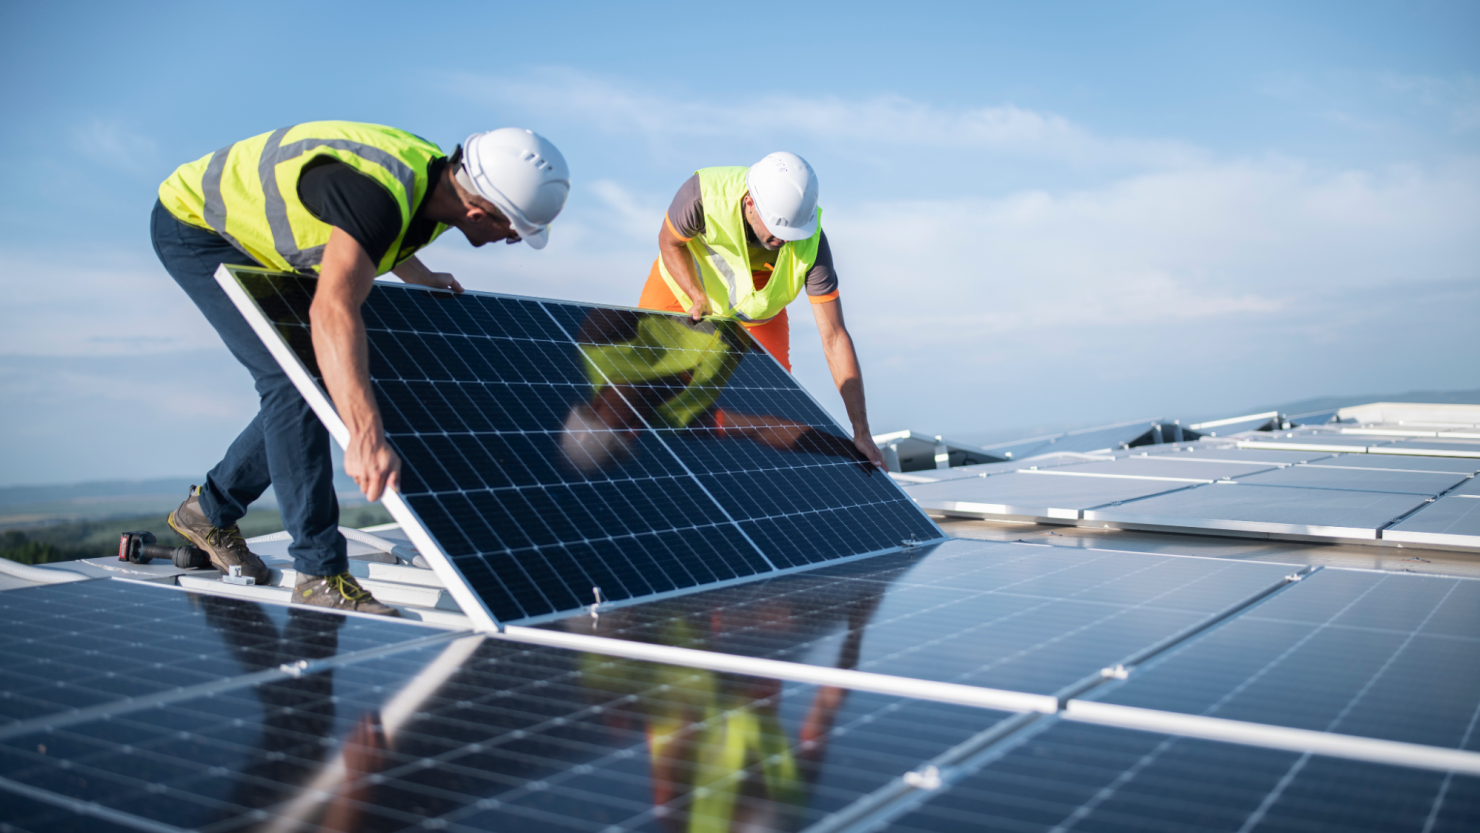 Two engineers install solar panels on a roof